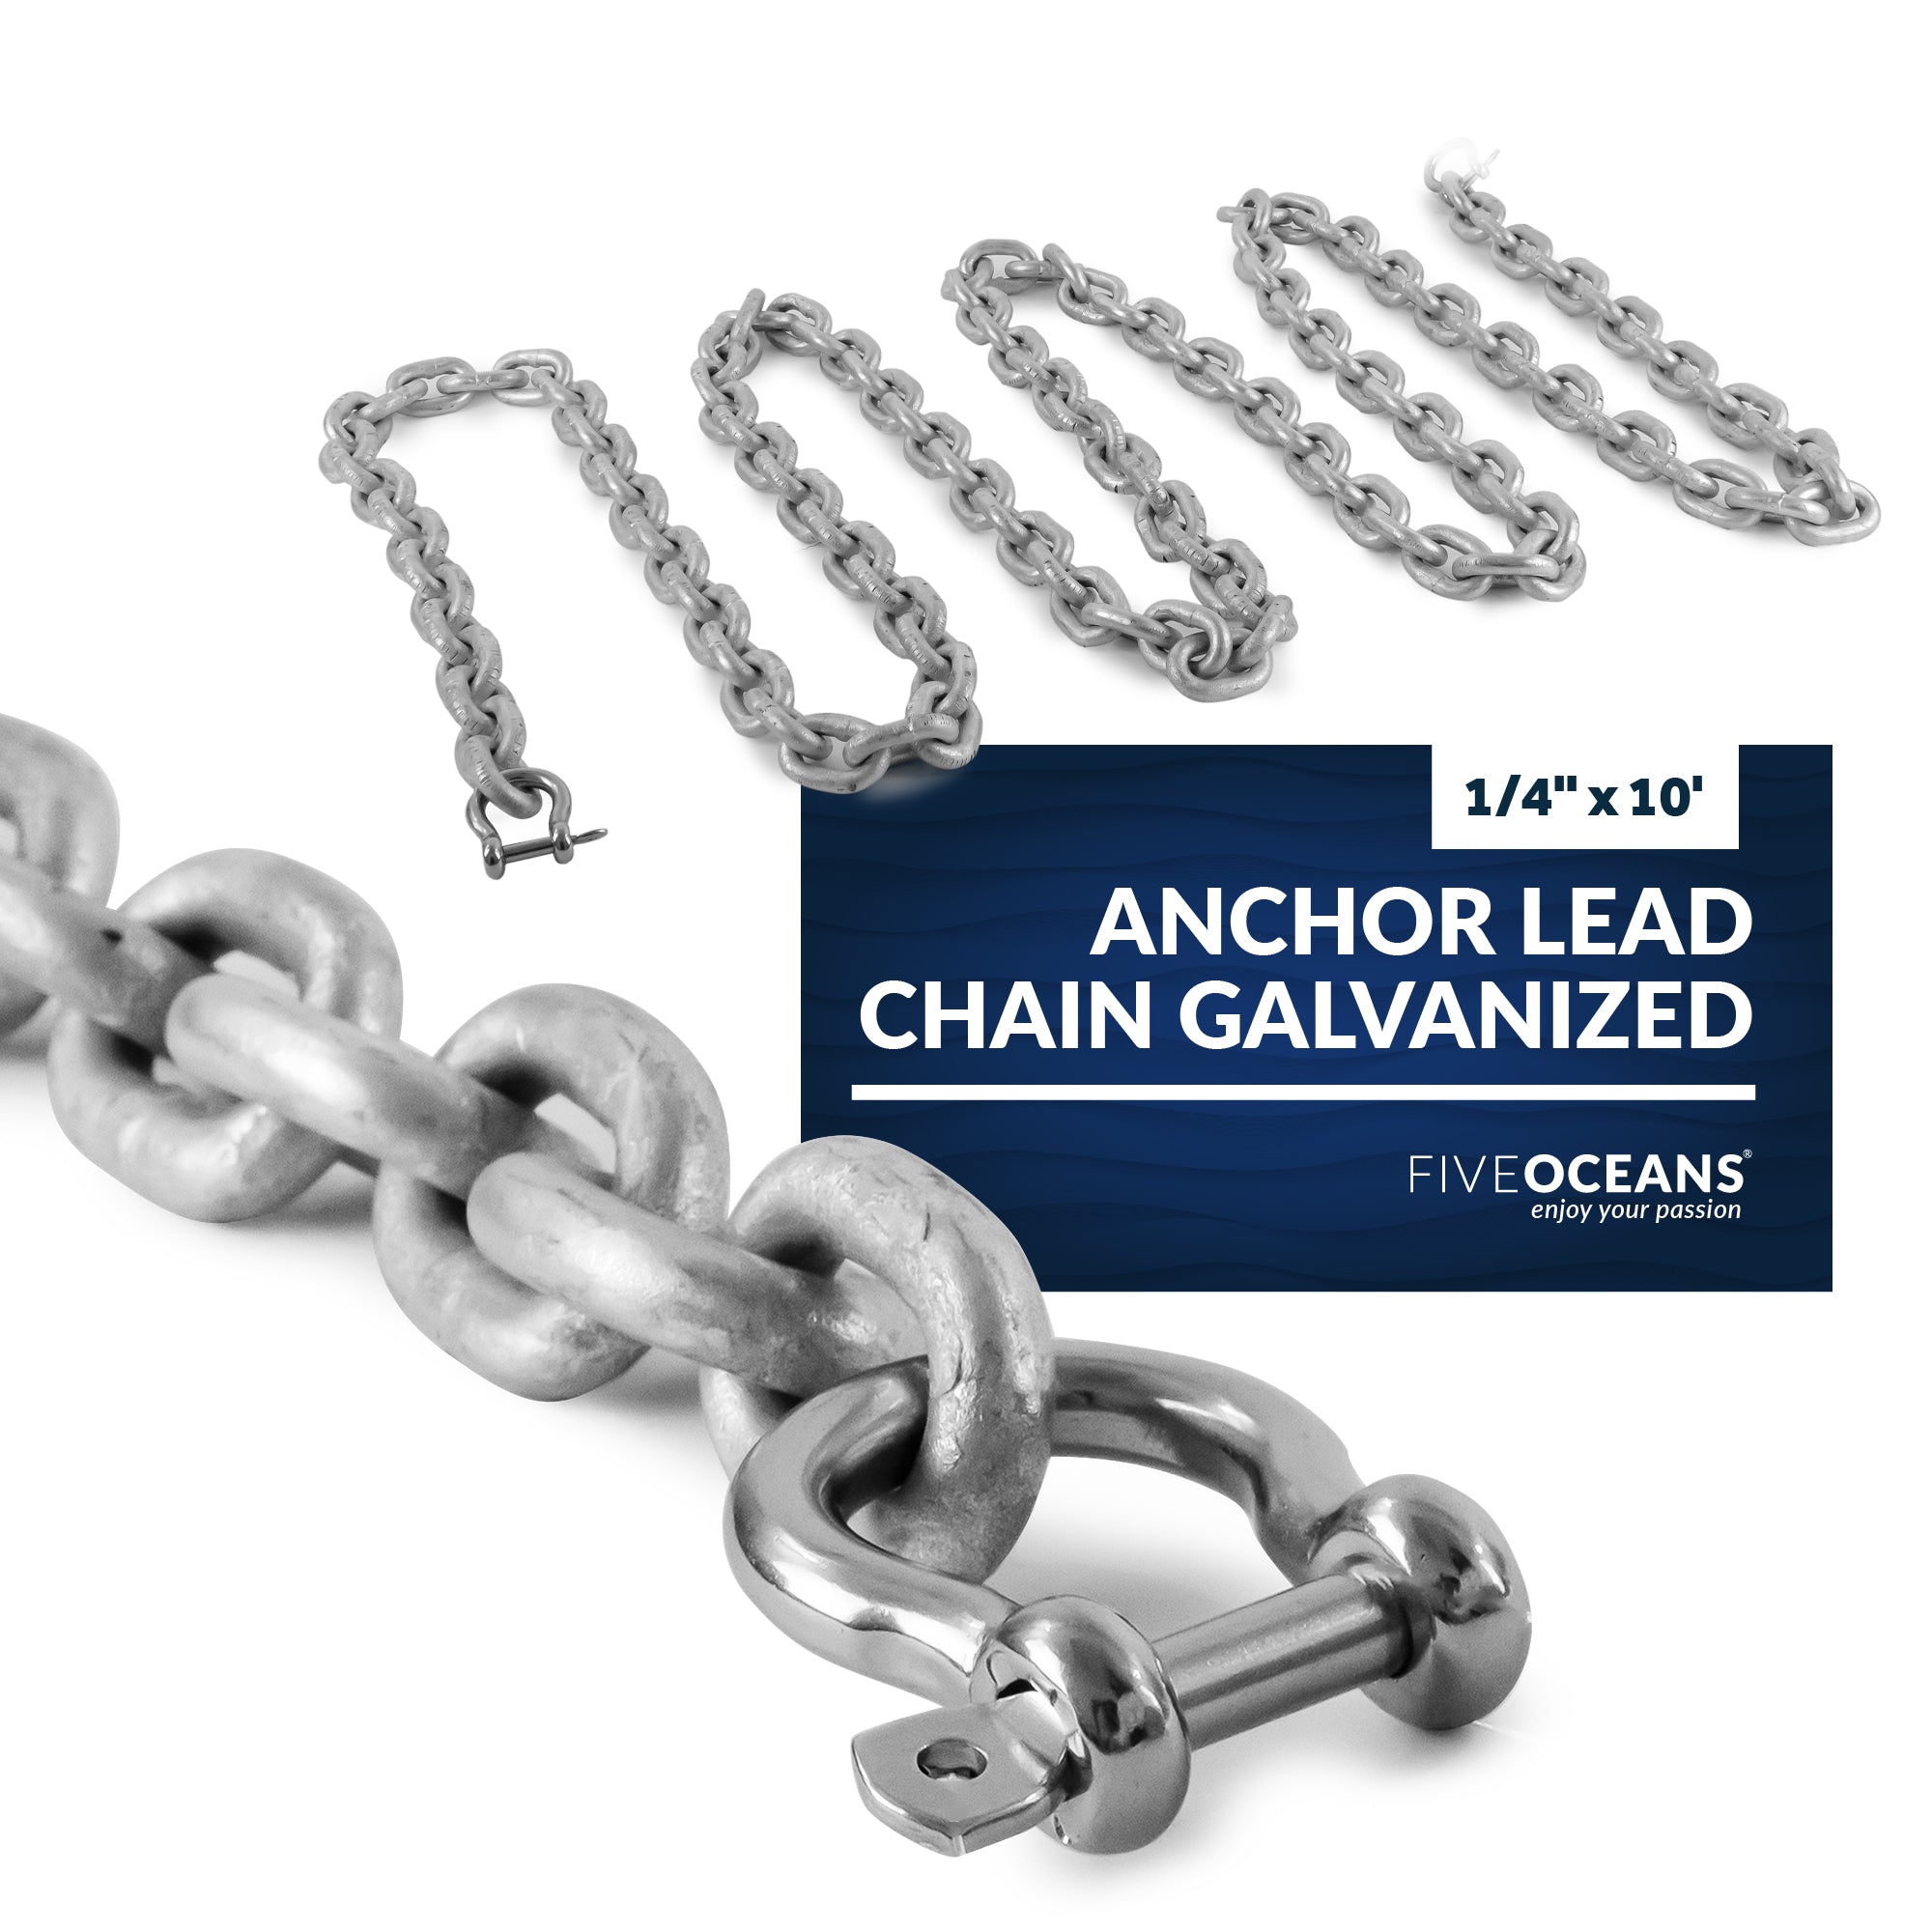 Boat Anchor Lead Chain with Shackles, 1/4" x 10', HTG4 Galvanized Steel - FO4489-G10